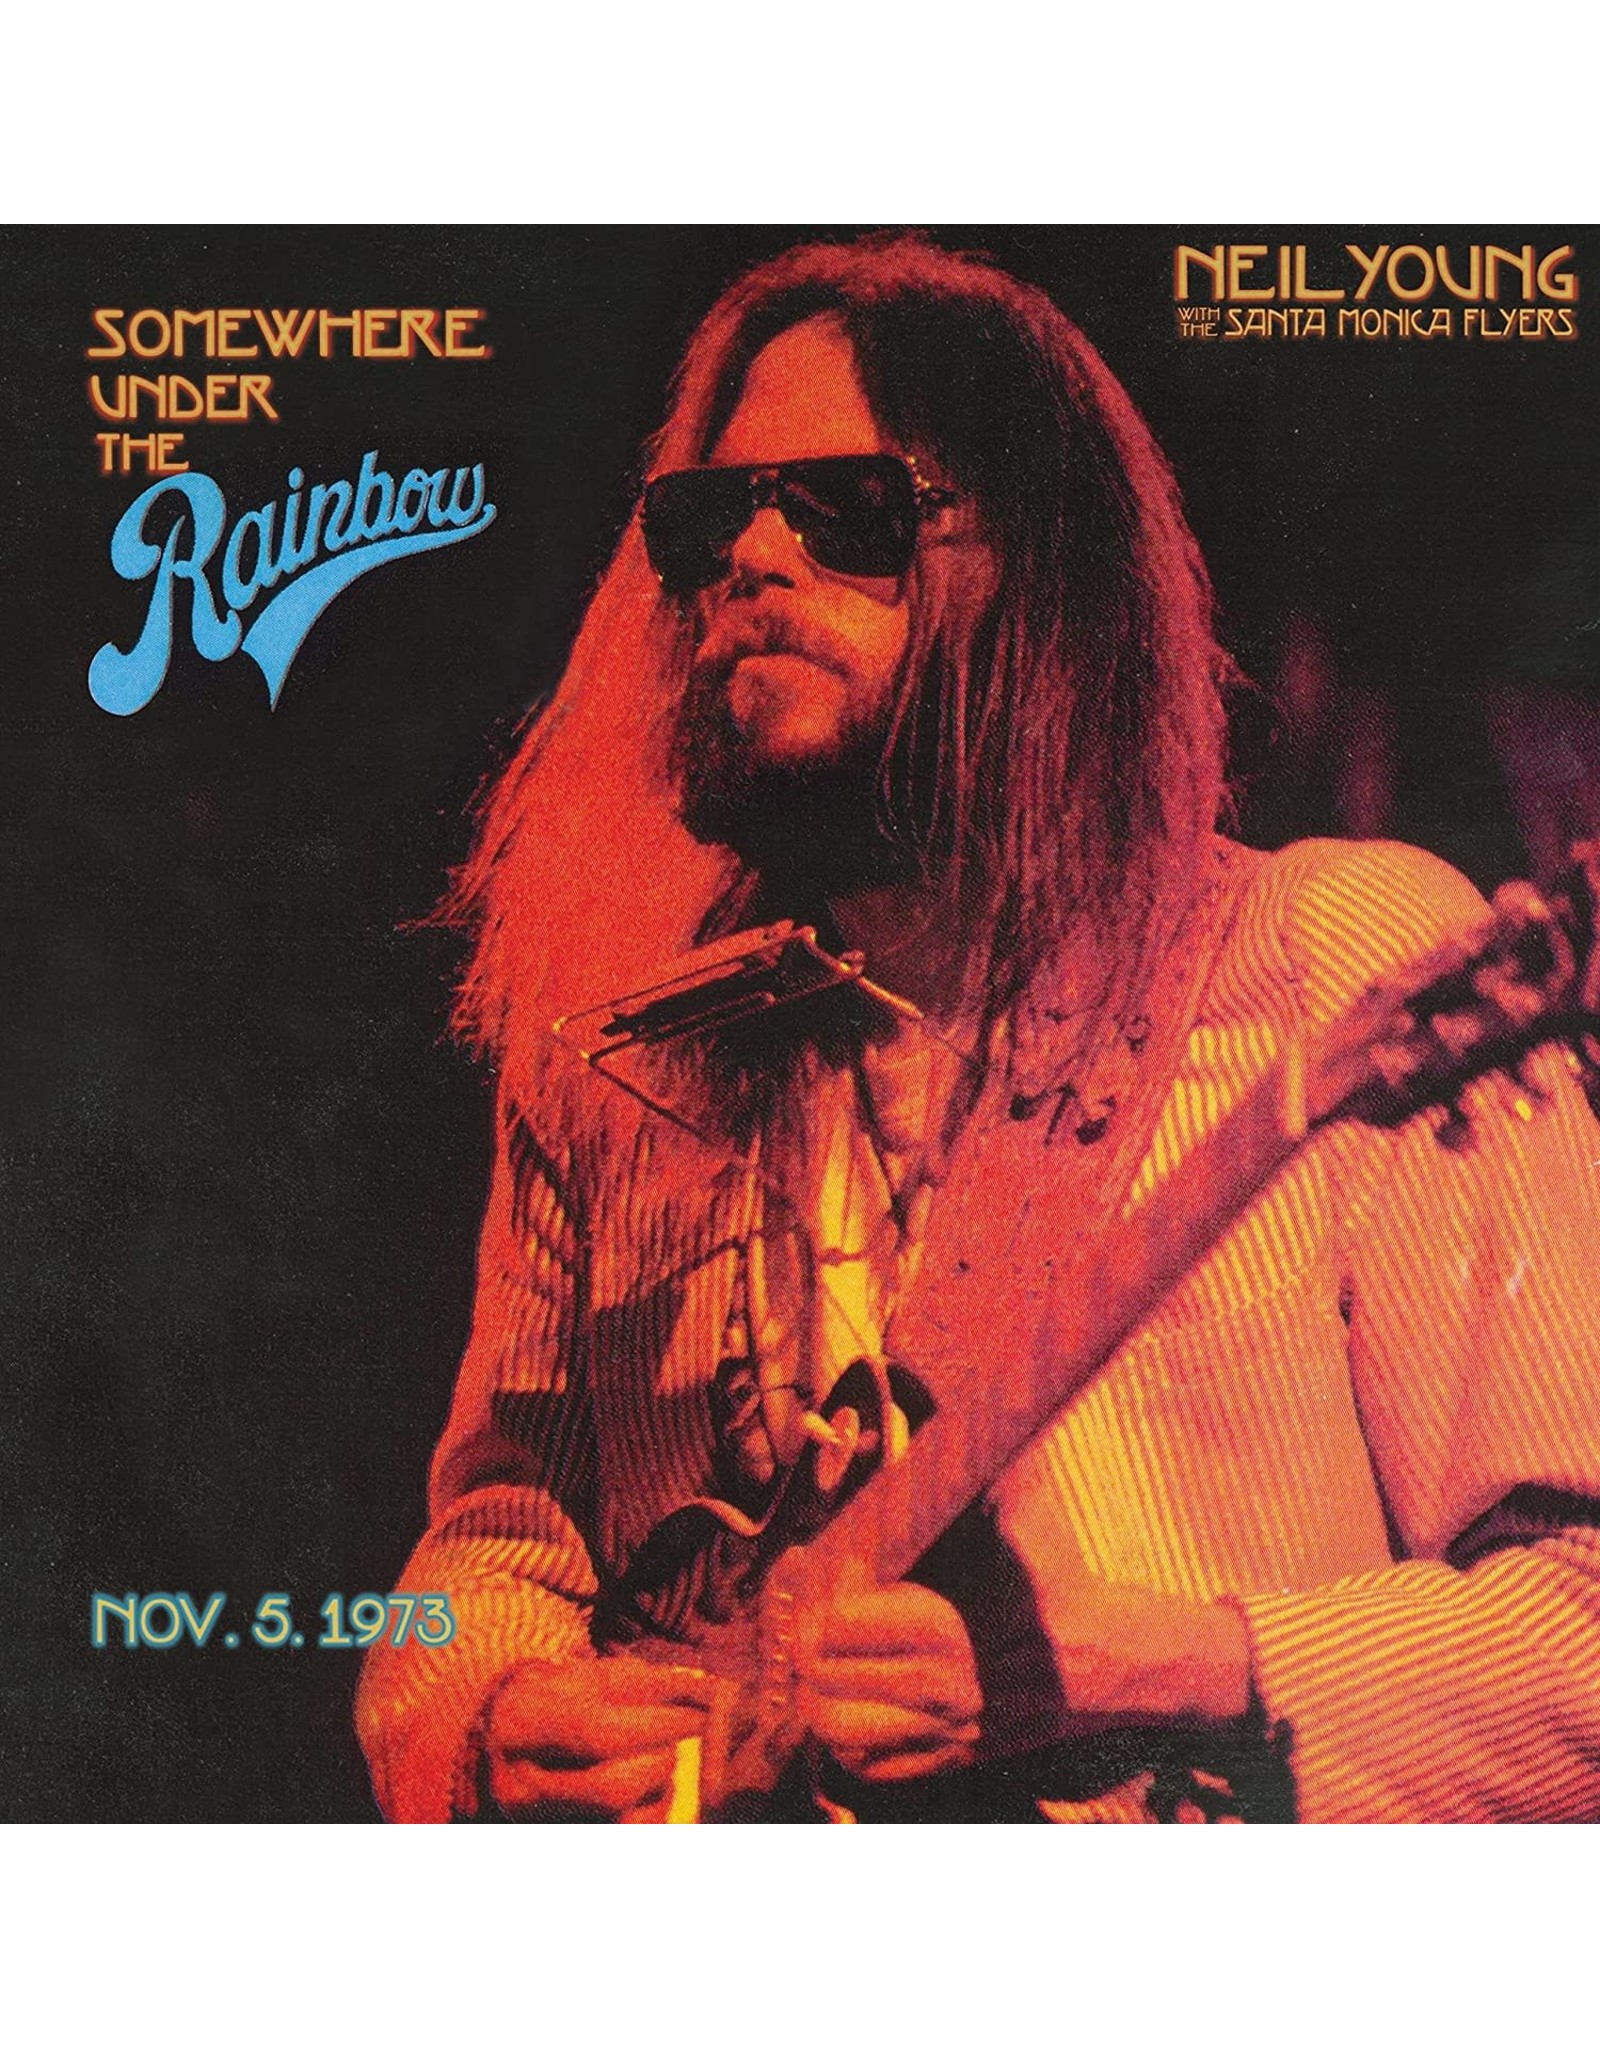 Neil Young - Somewhere Under The Rainbow 1973